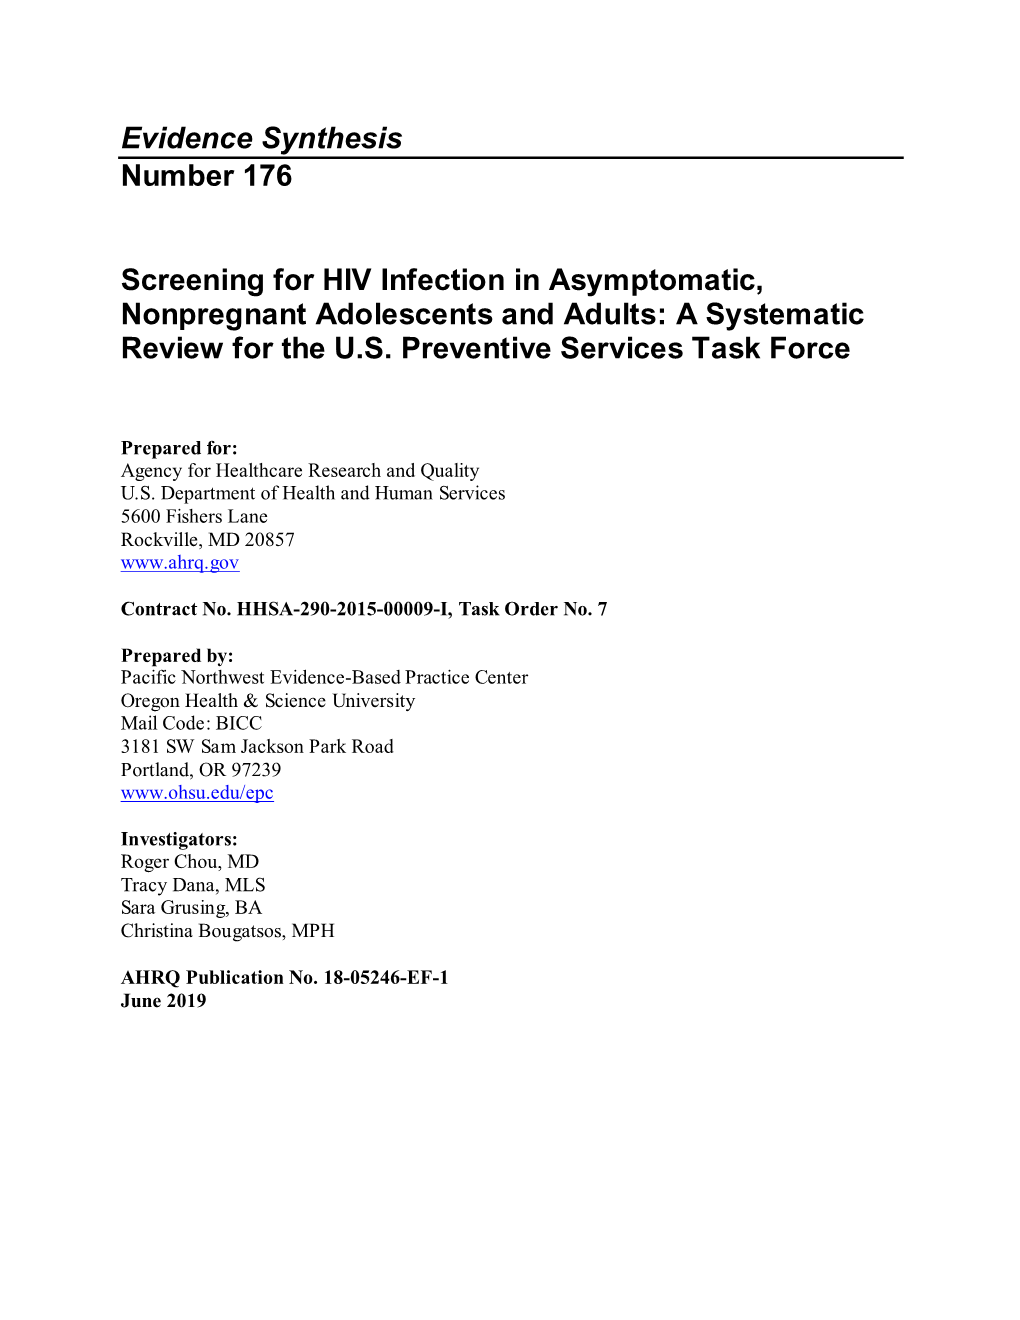 Screening for HIV Infection in Asymptomatic, Nonpregnant Adolescents and Adults: a Systematic Review for the U.S